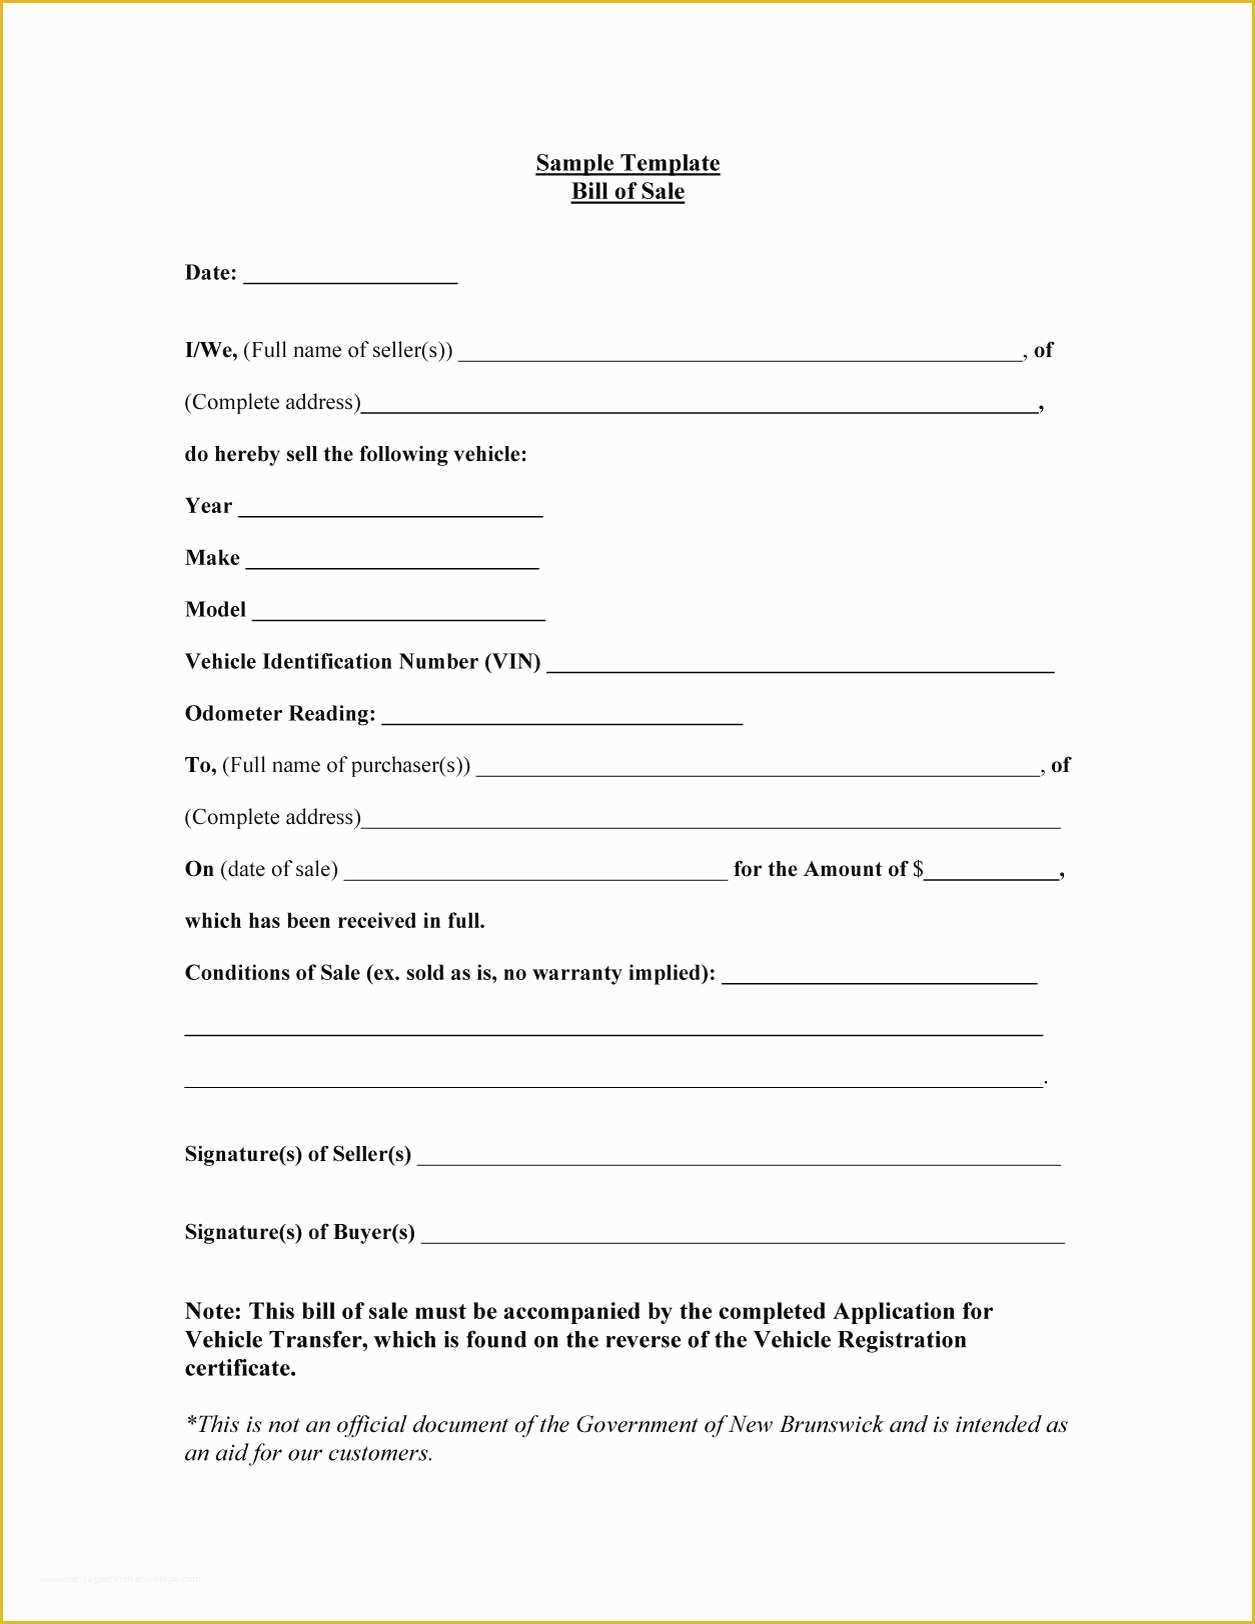 Free Bill Of Sale Template Of 46 Fee Printable Bill Of Sale Templates Car Boat Gun